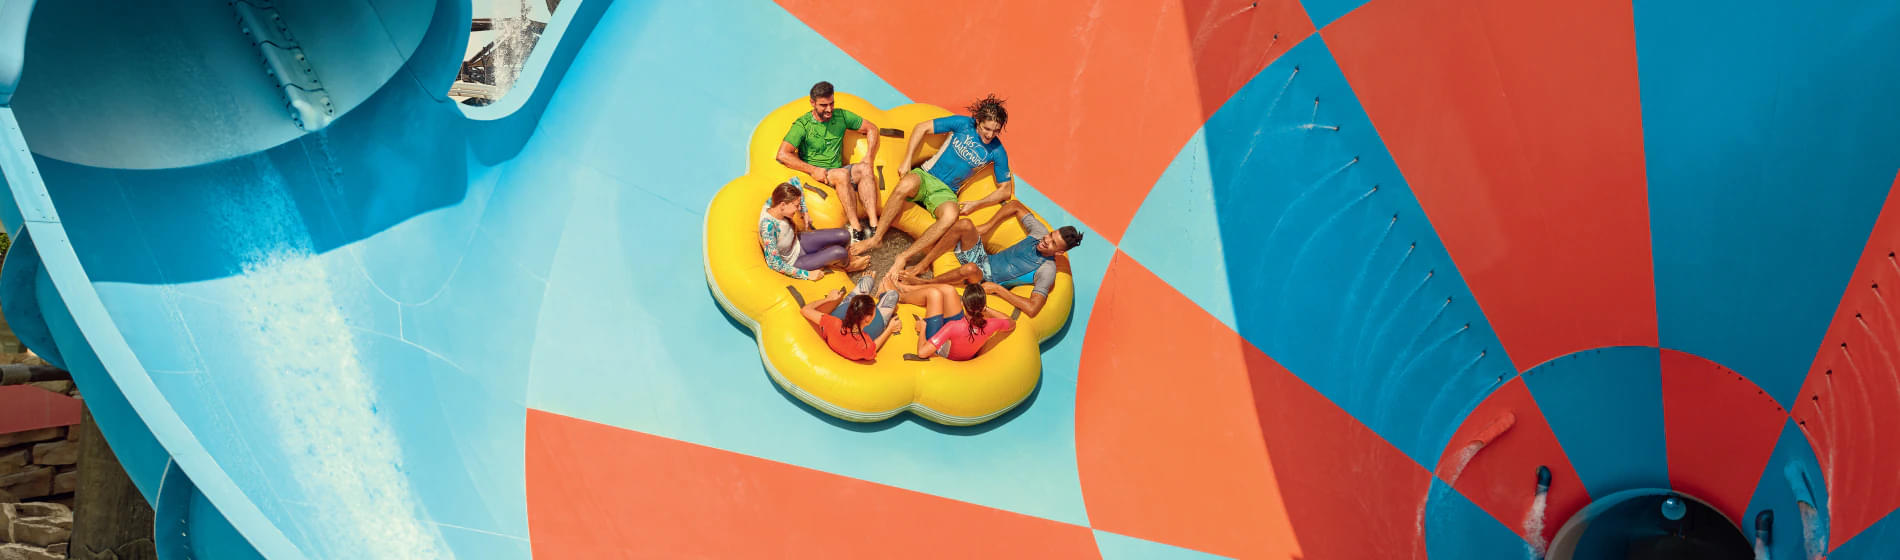 Slide into endless fun on the Slides of Dawwama with your friends